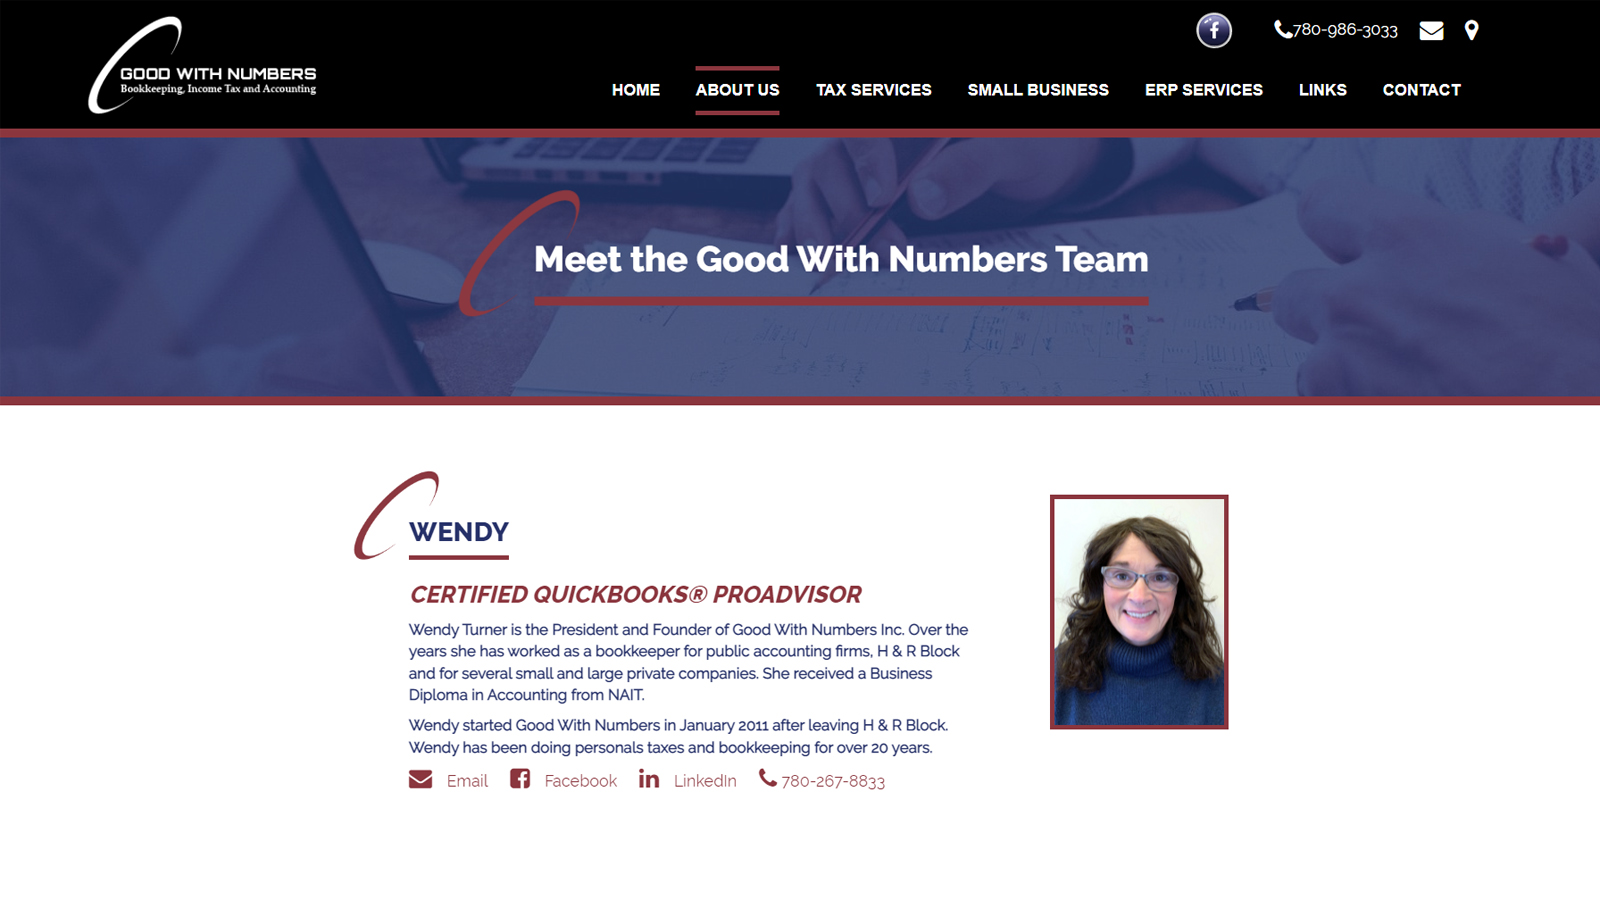 Good With Numbers team page - website designed by Industrial NetMedia/Creative101